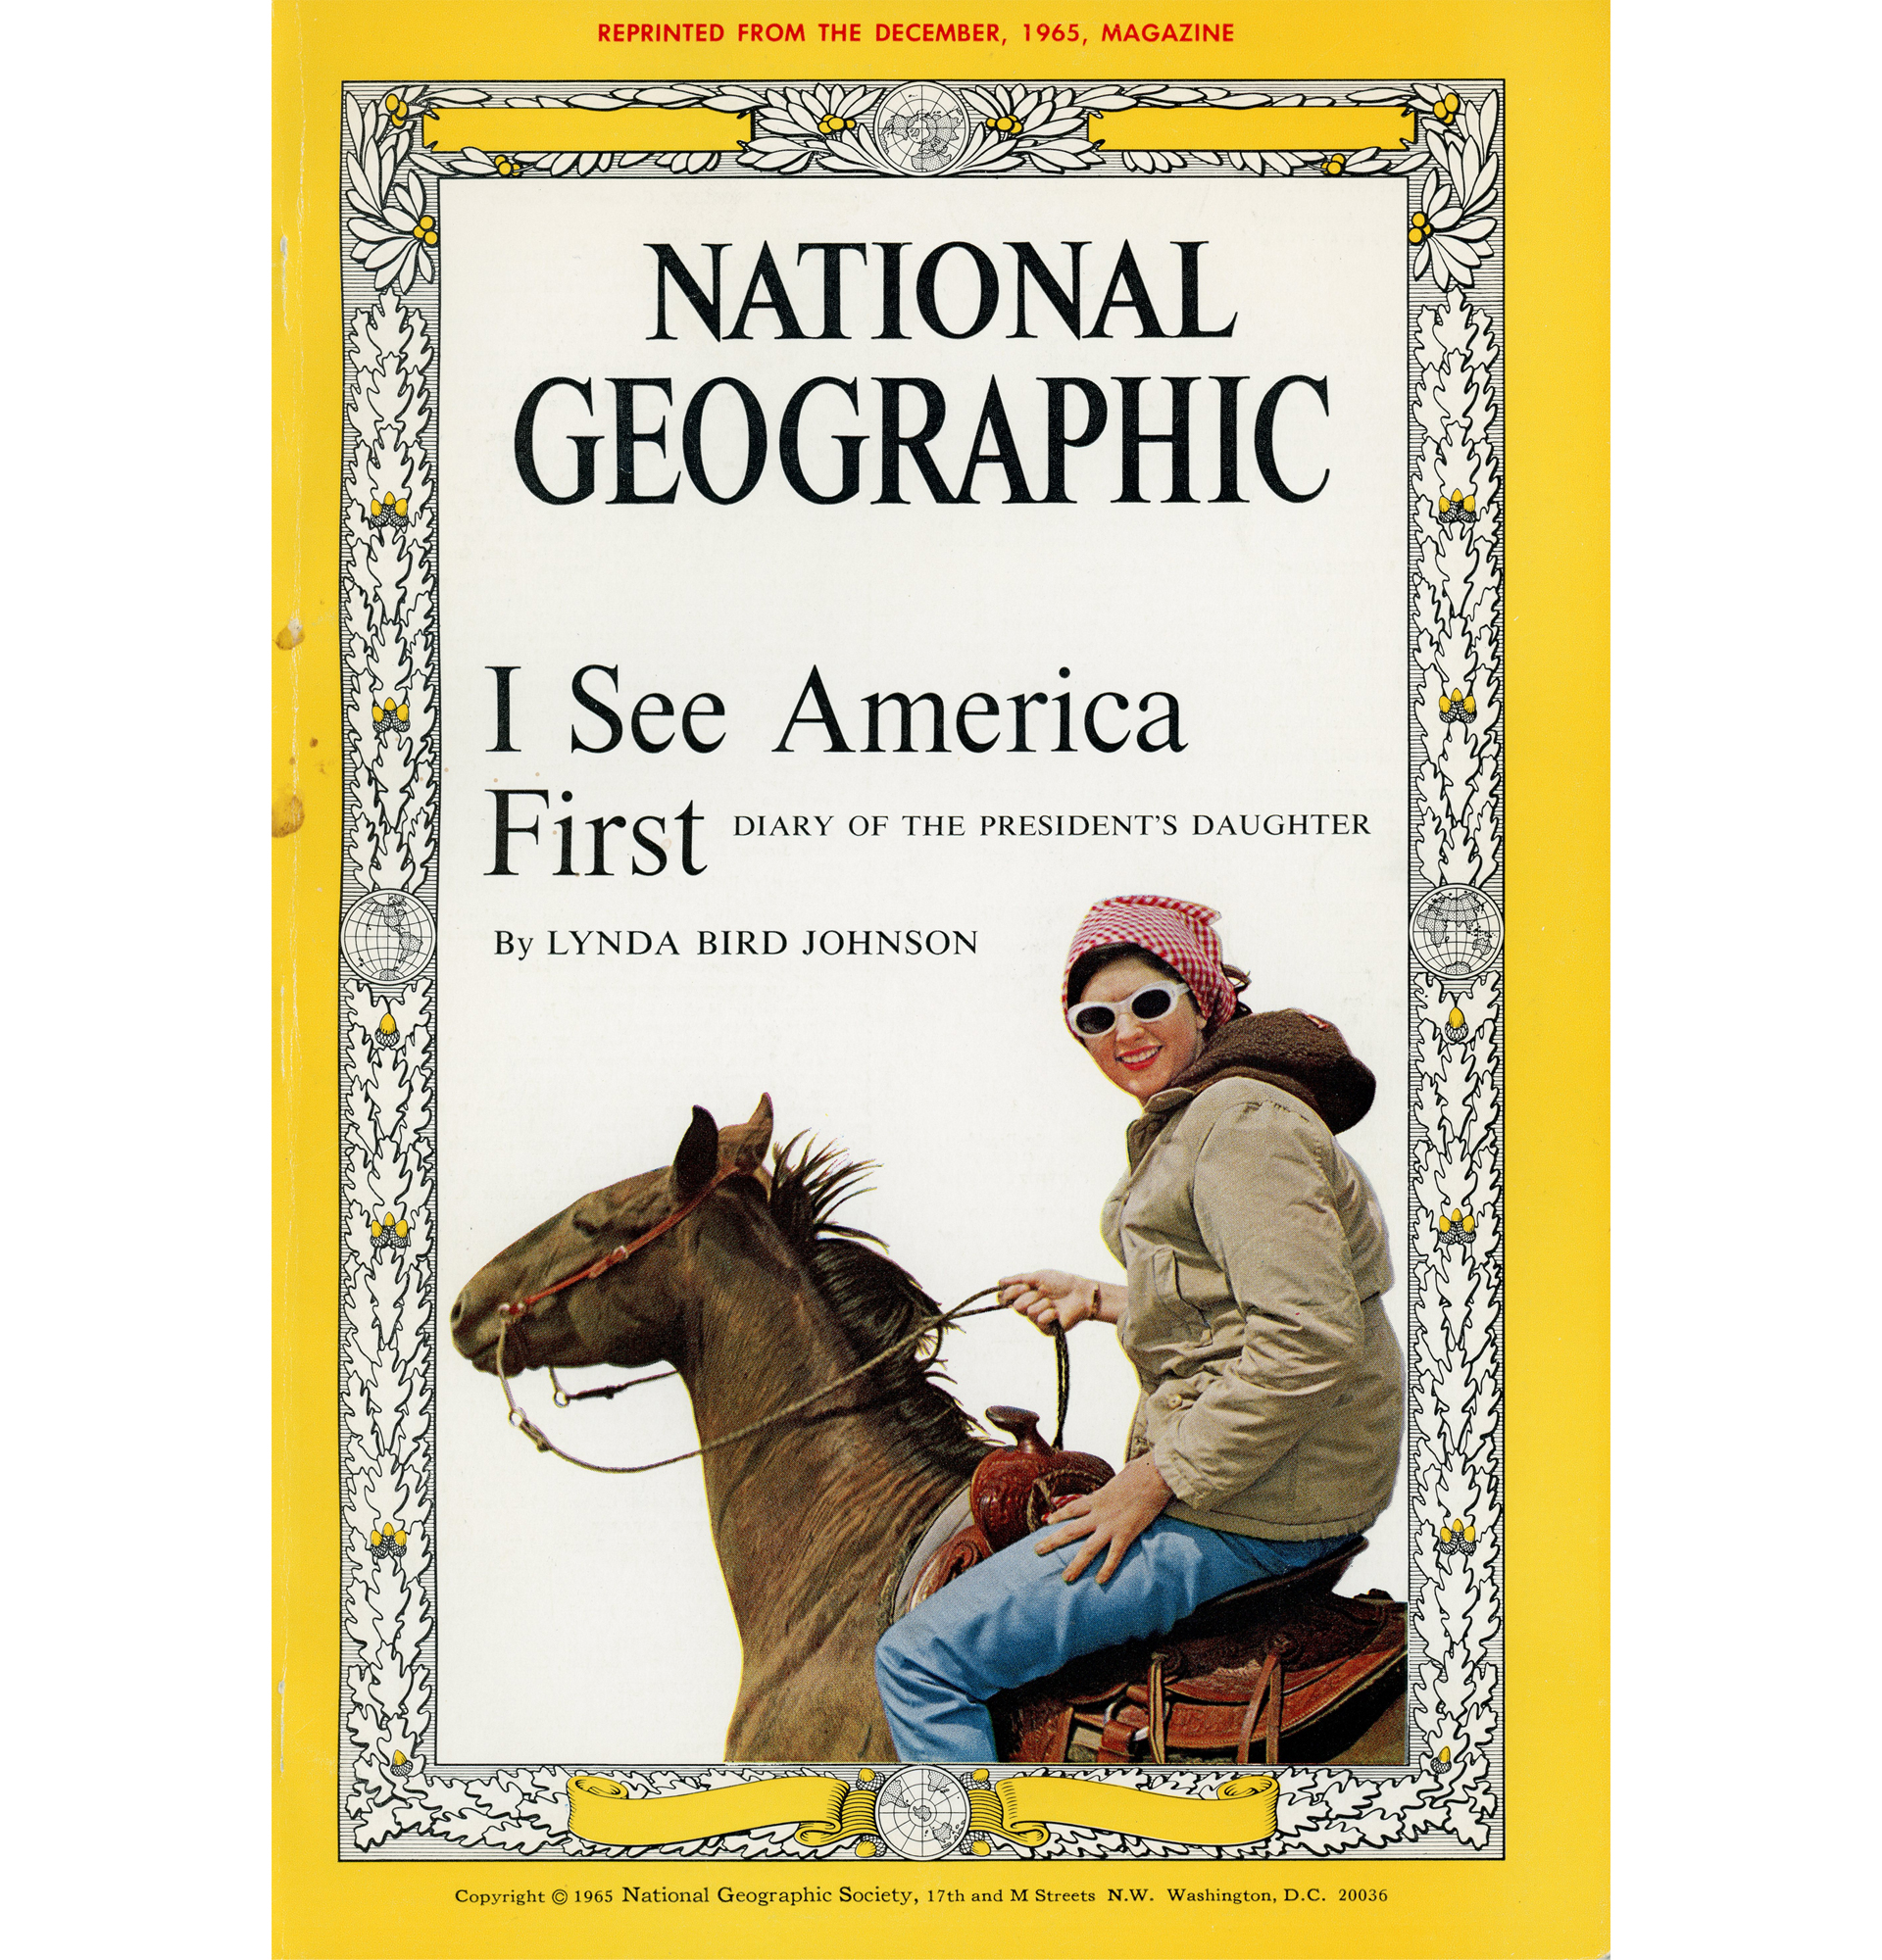 An old cover of National Geography with a lady riding a horse with the title "I See America First"